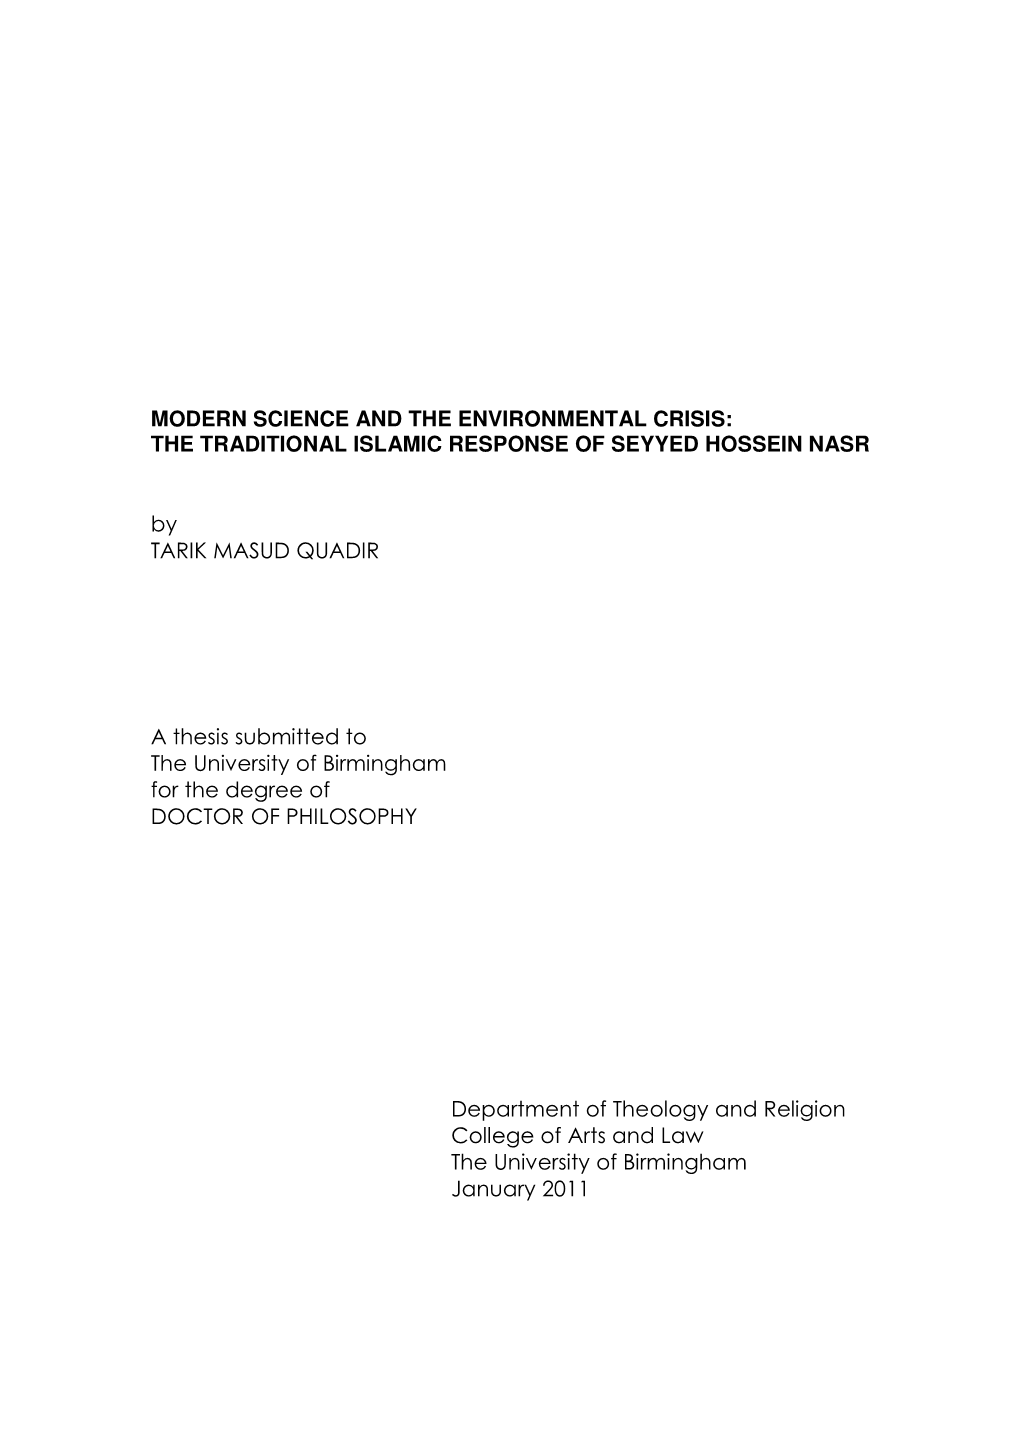 Modern Science and the Environmental Crisis: the Traditional Islamic Response of Seyyed Hossein Nasr